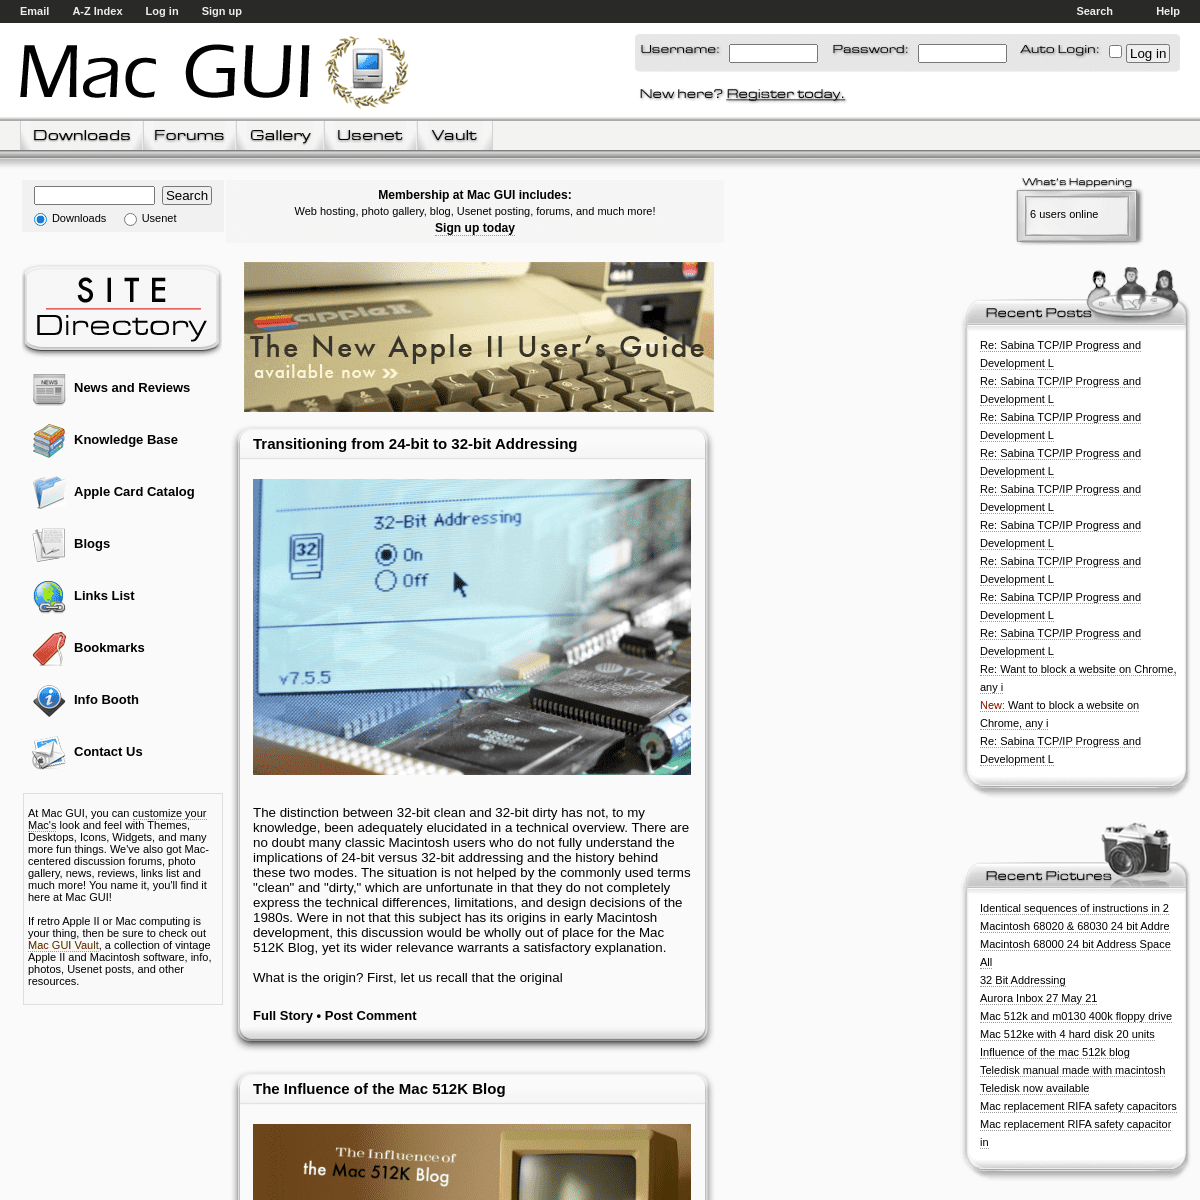 A complete backup of https://macgui.com